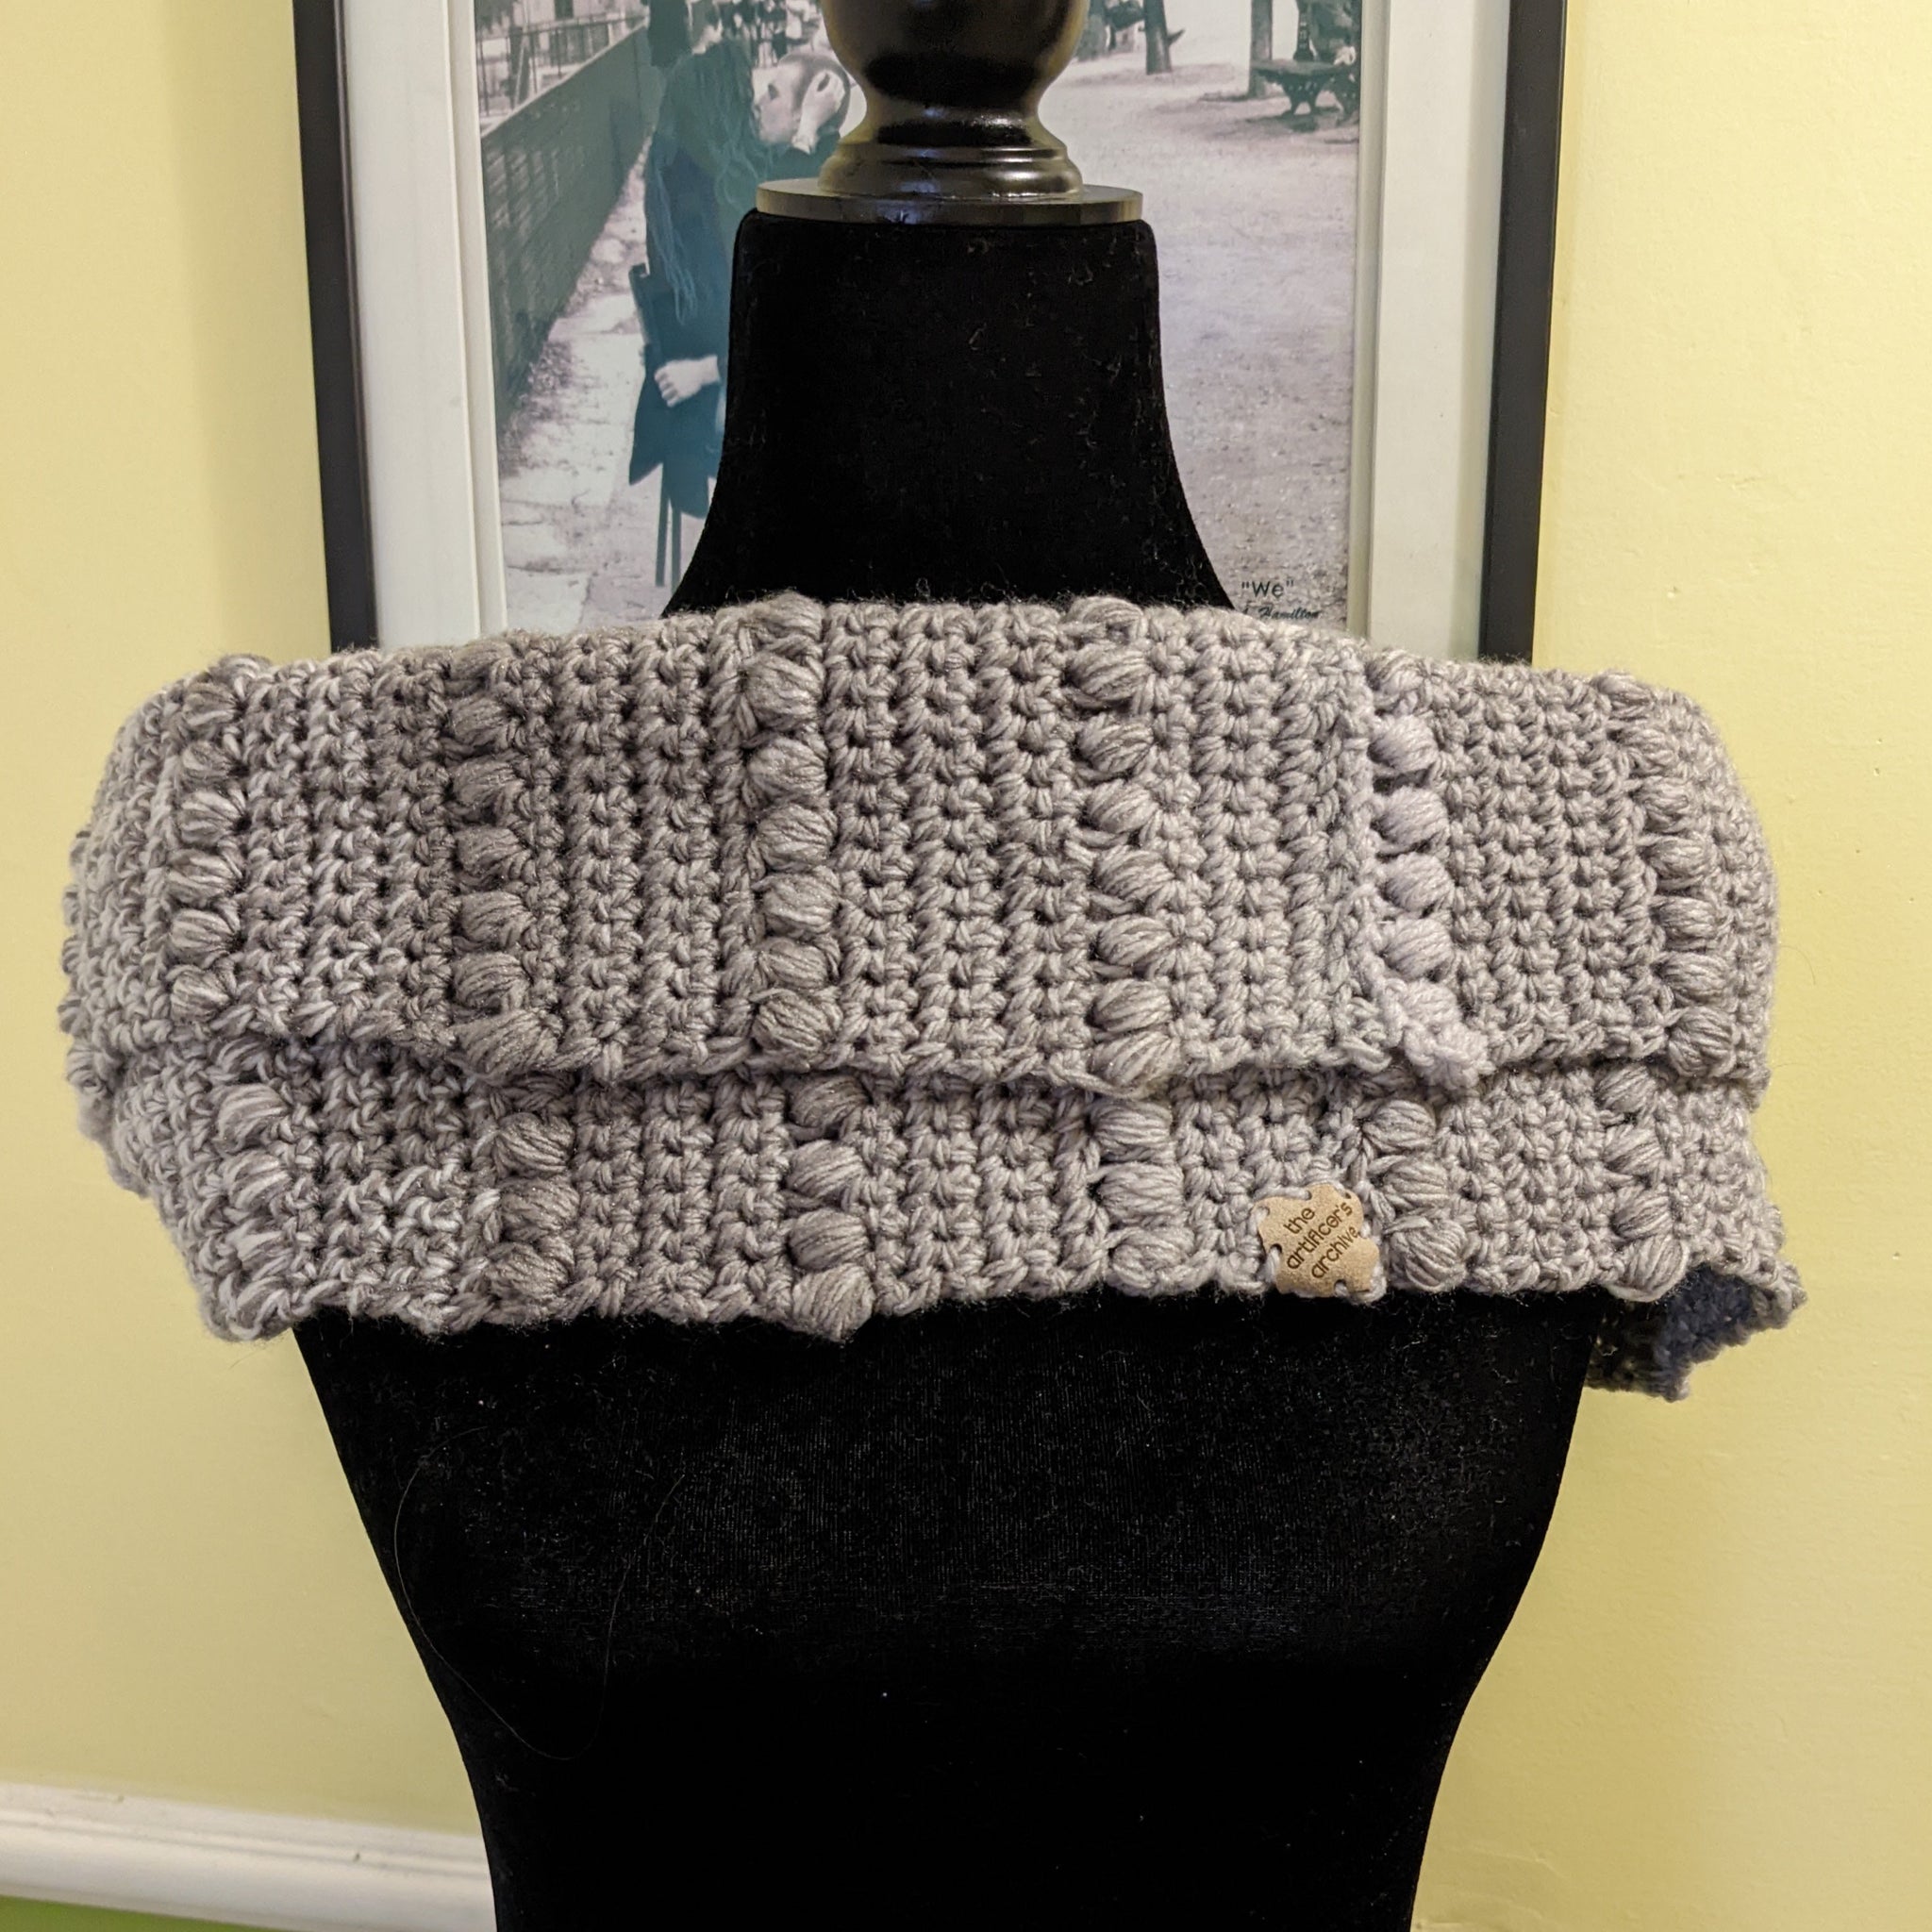 Warm Winter Cowl in Cloudy Day